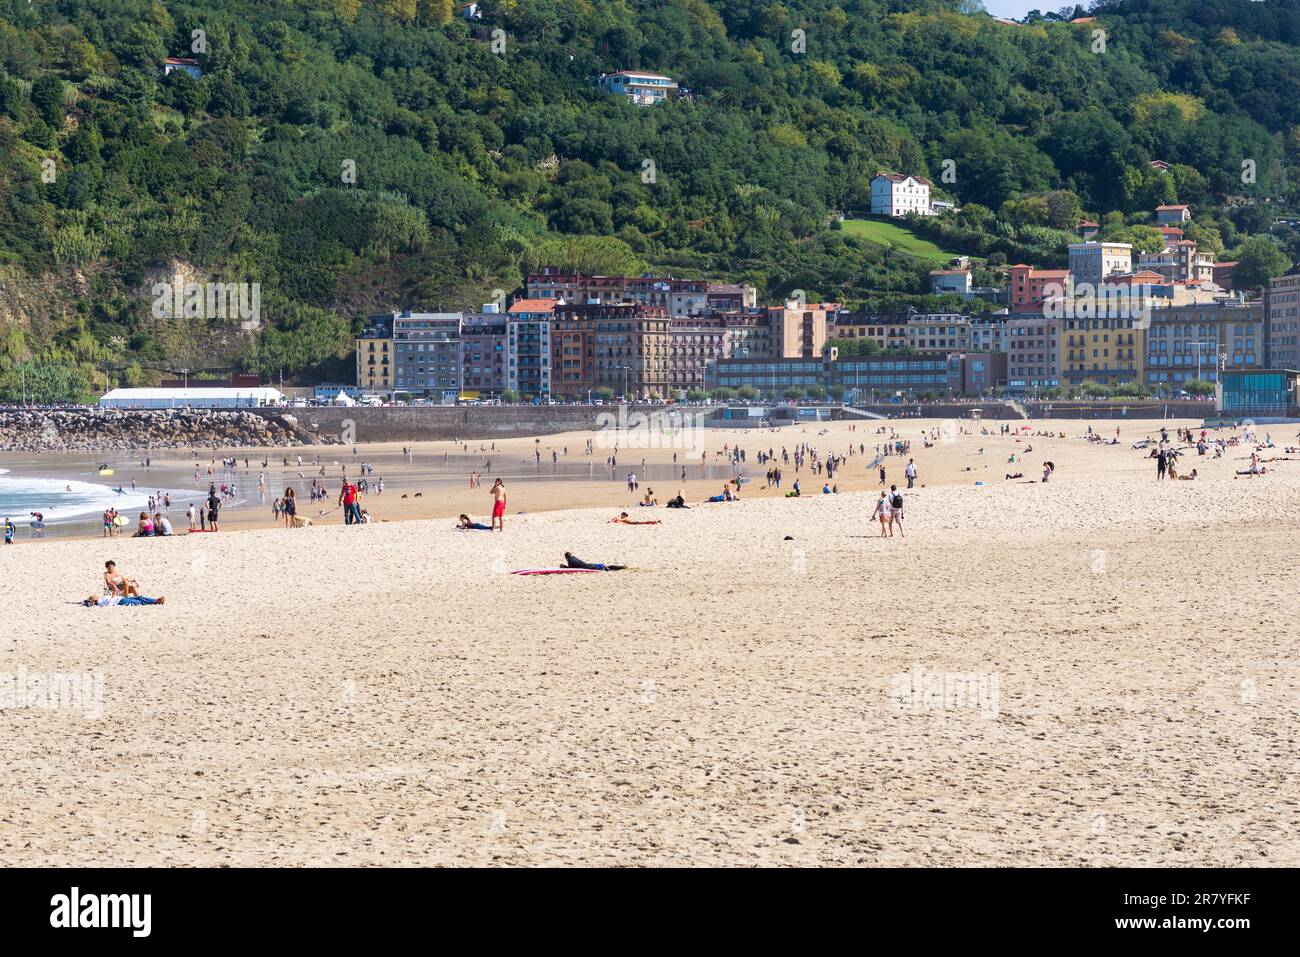 The beach la Zurriola in Donostia San Sebastian. The beach, situated at the district Gros of Donostia is famous for surfing, sports and relaxing Stock Photo